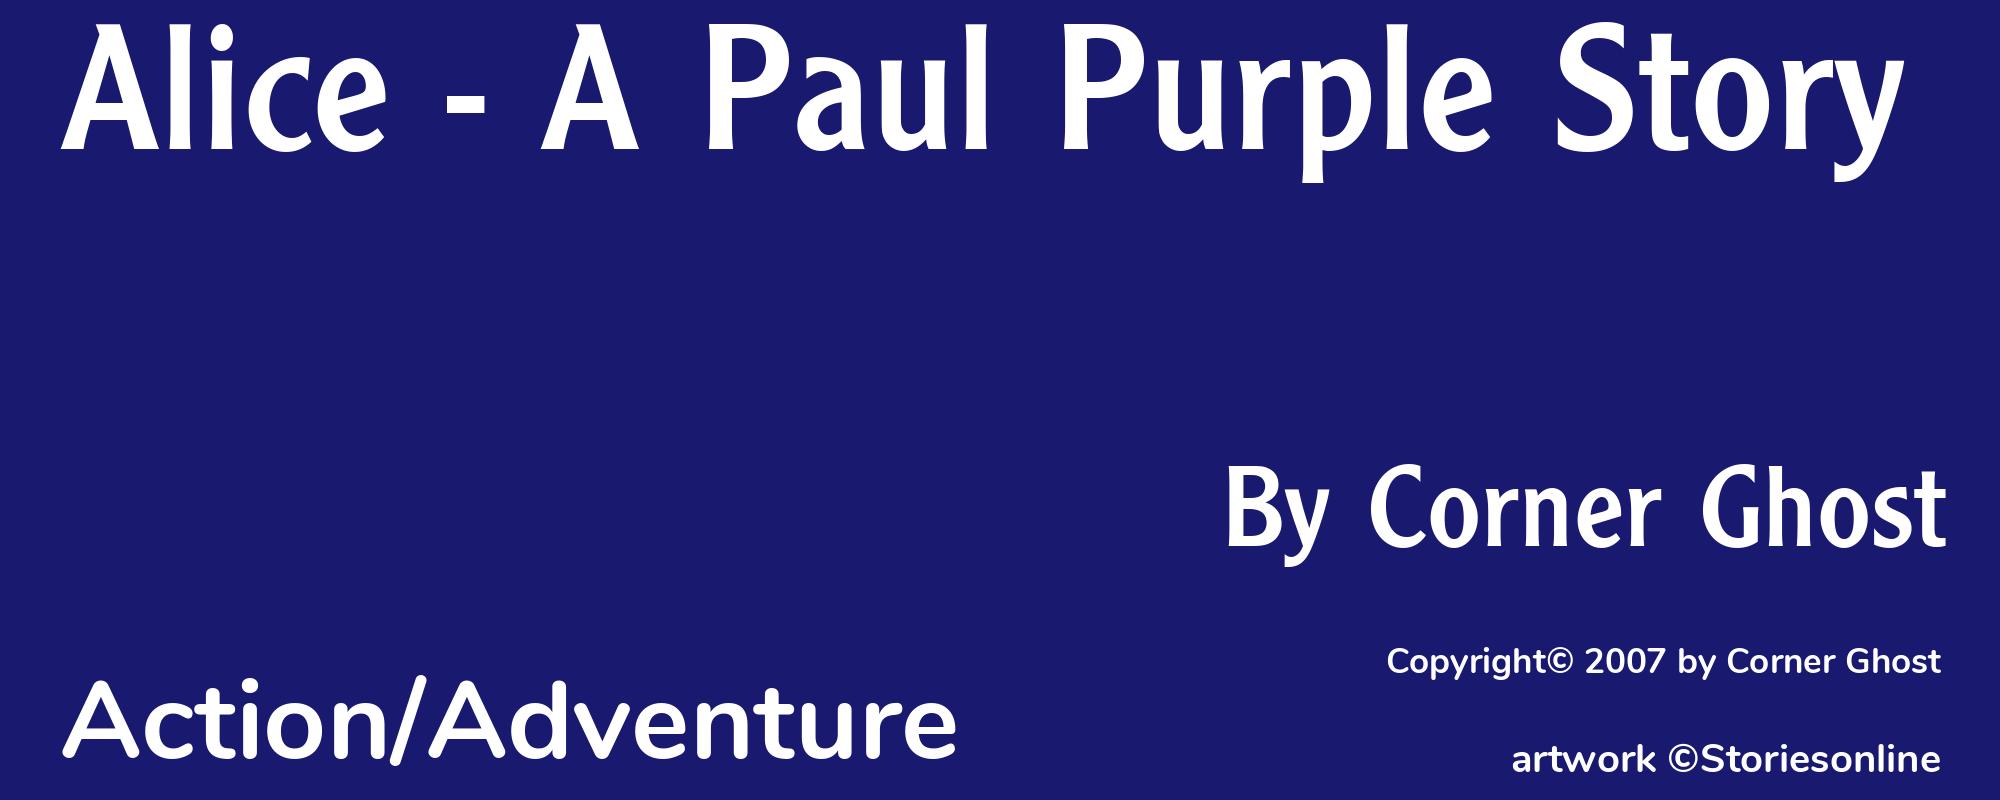 Alice - A Paul Purple Story - Cover